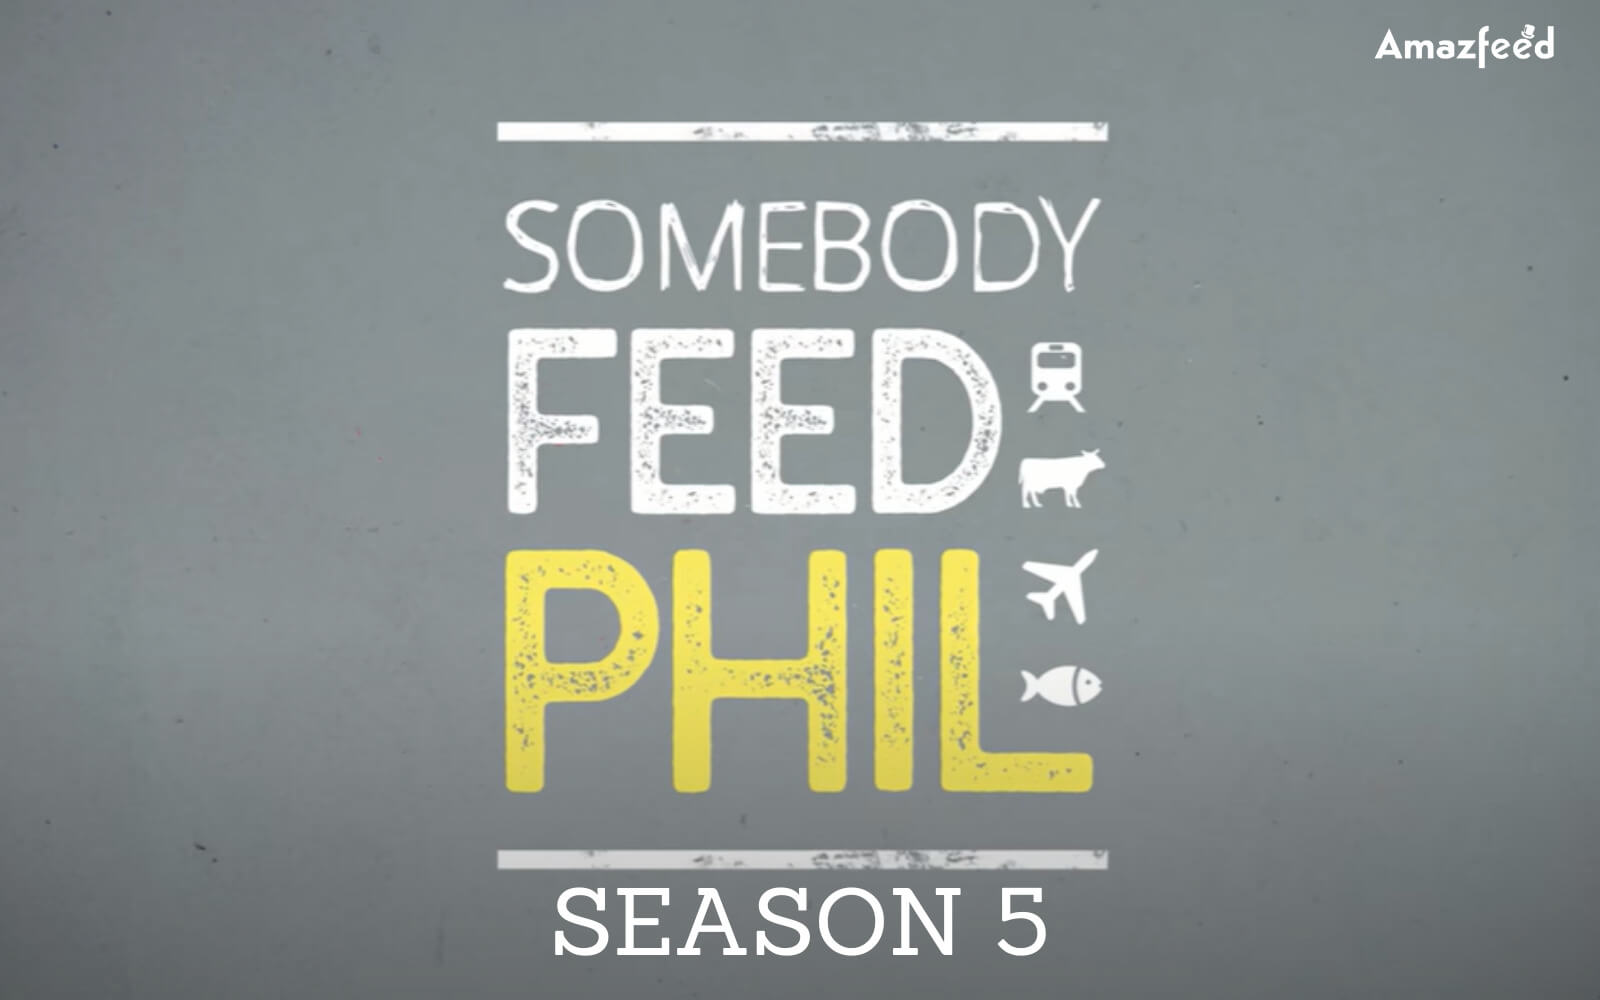 Somebody Feed Phil Season 5 Release Date